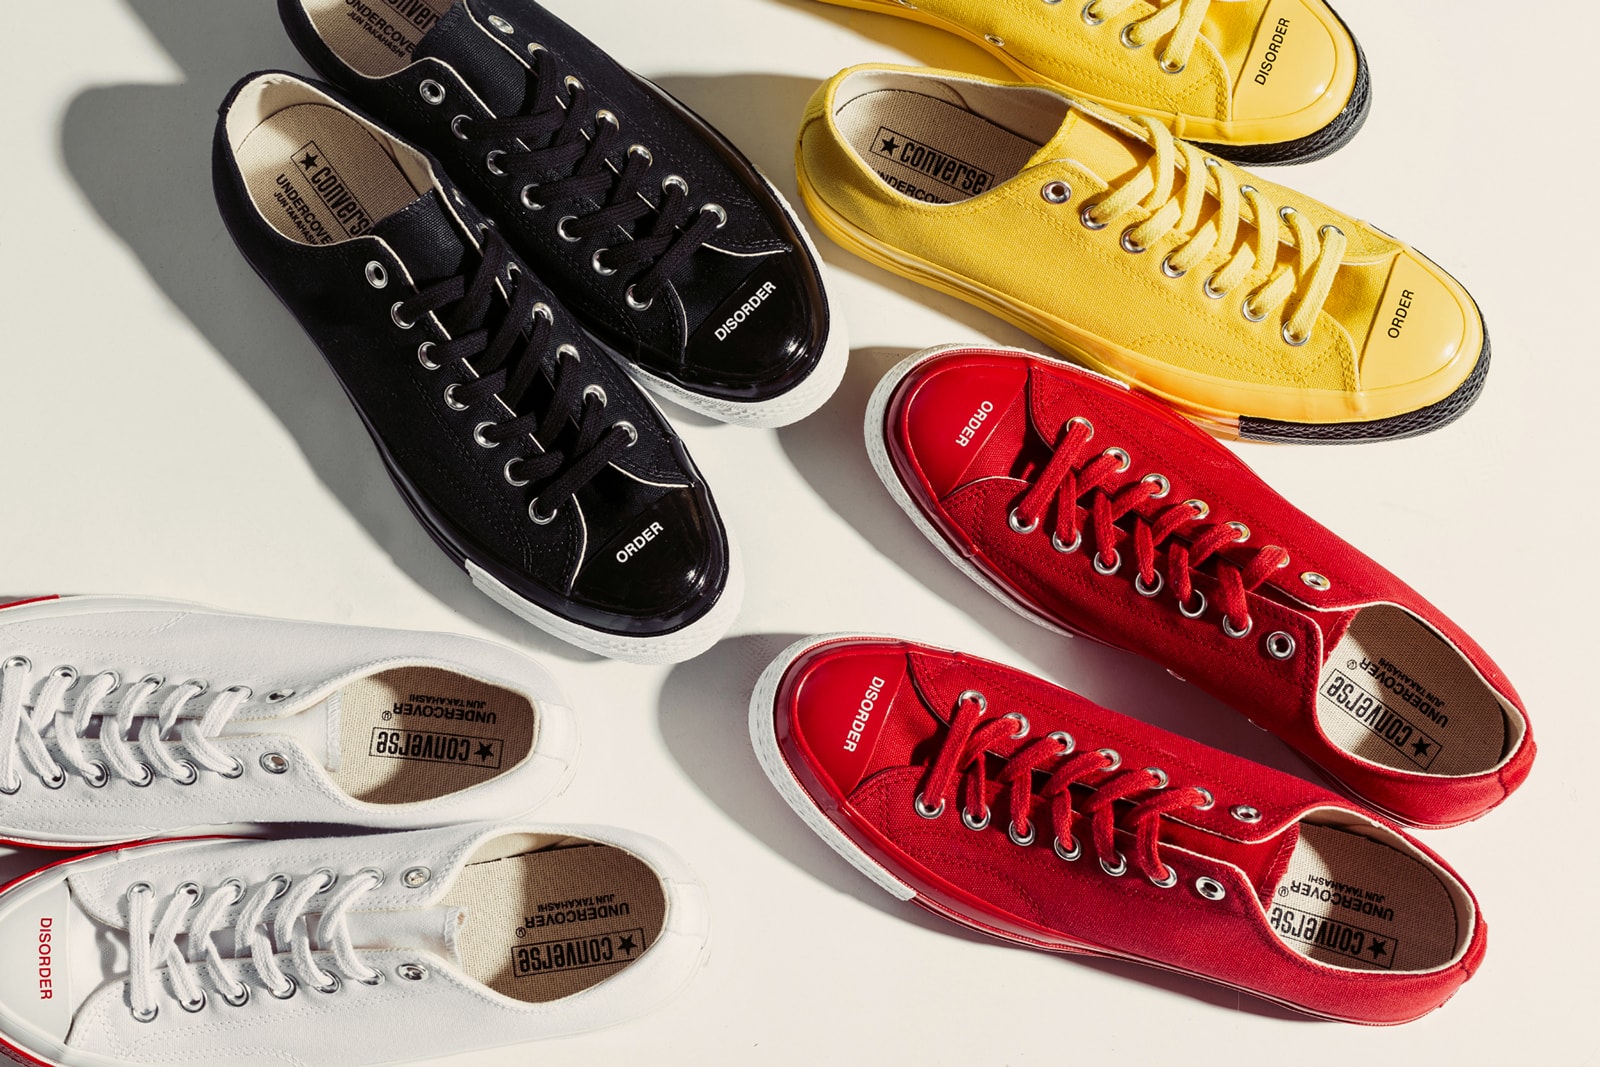 Converse x Undercover "Order and Disorder" Collection Shoes Trainers Sneakers Kicks Footwear Cop Purchase Buy Collab Collaboration Feature Sneaker Boutique